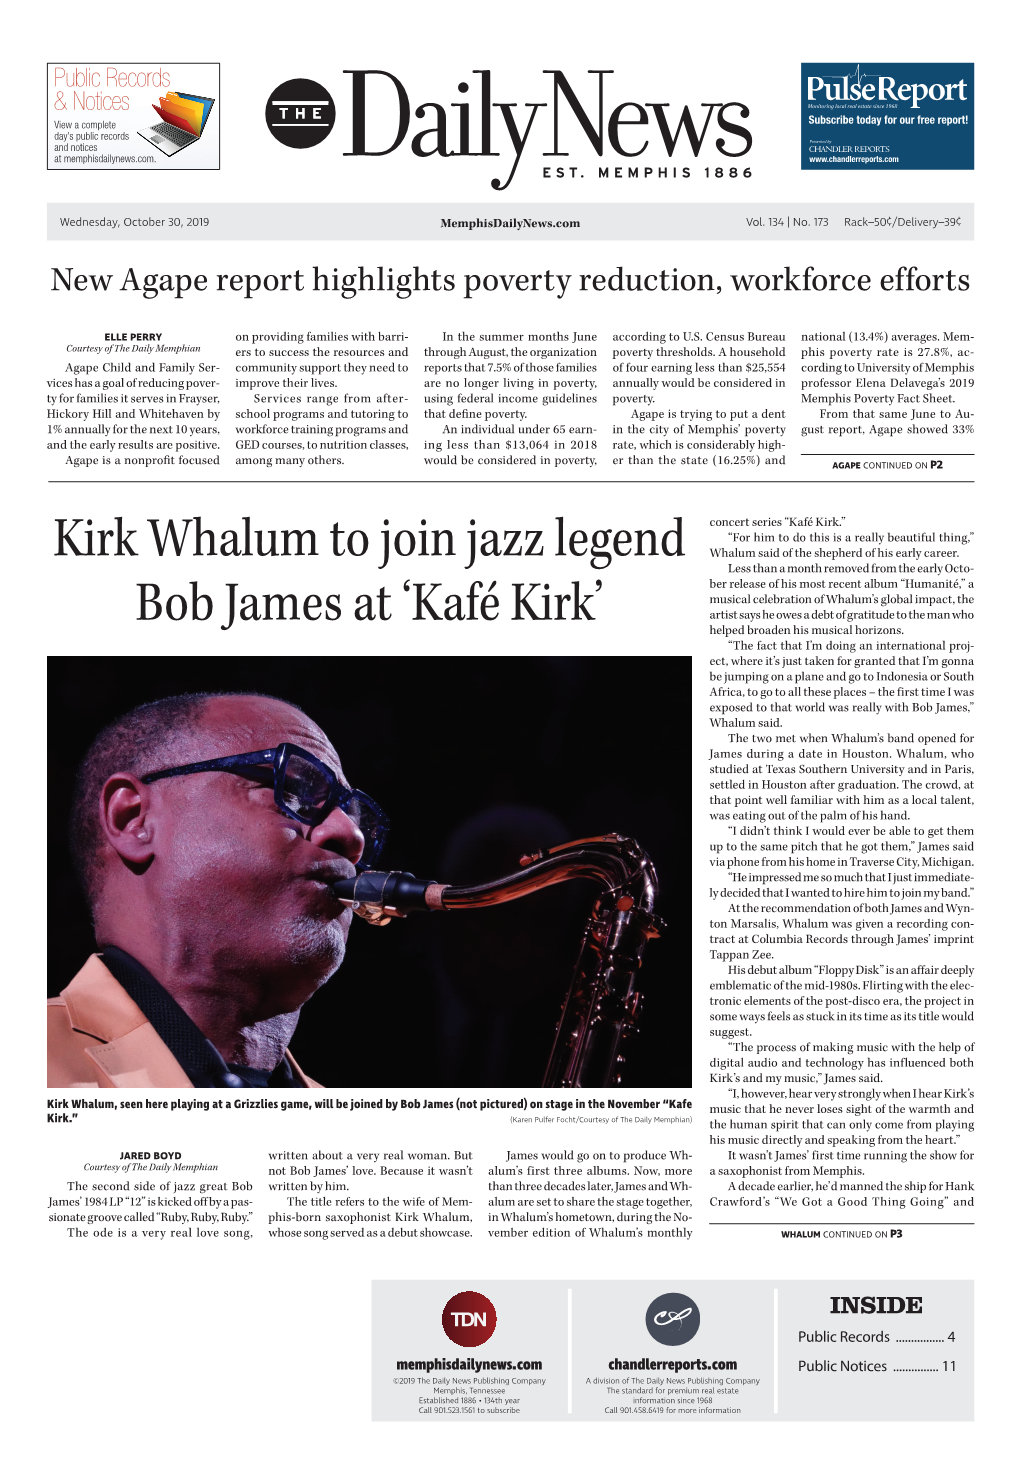 Kirk Whalum to Join Jazz Legend Bob James At